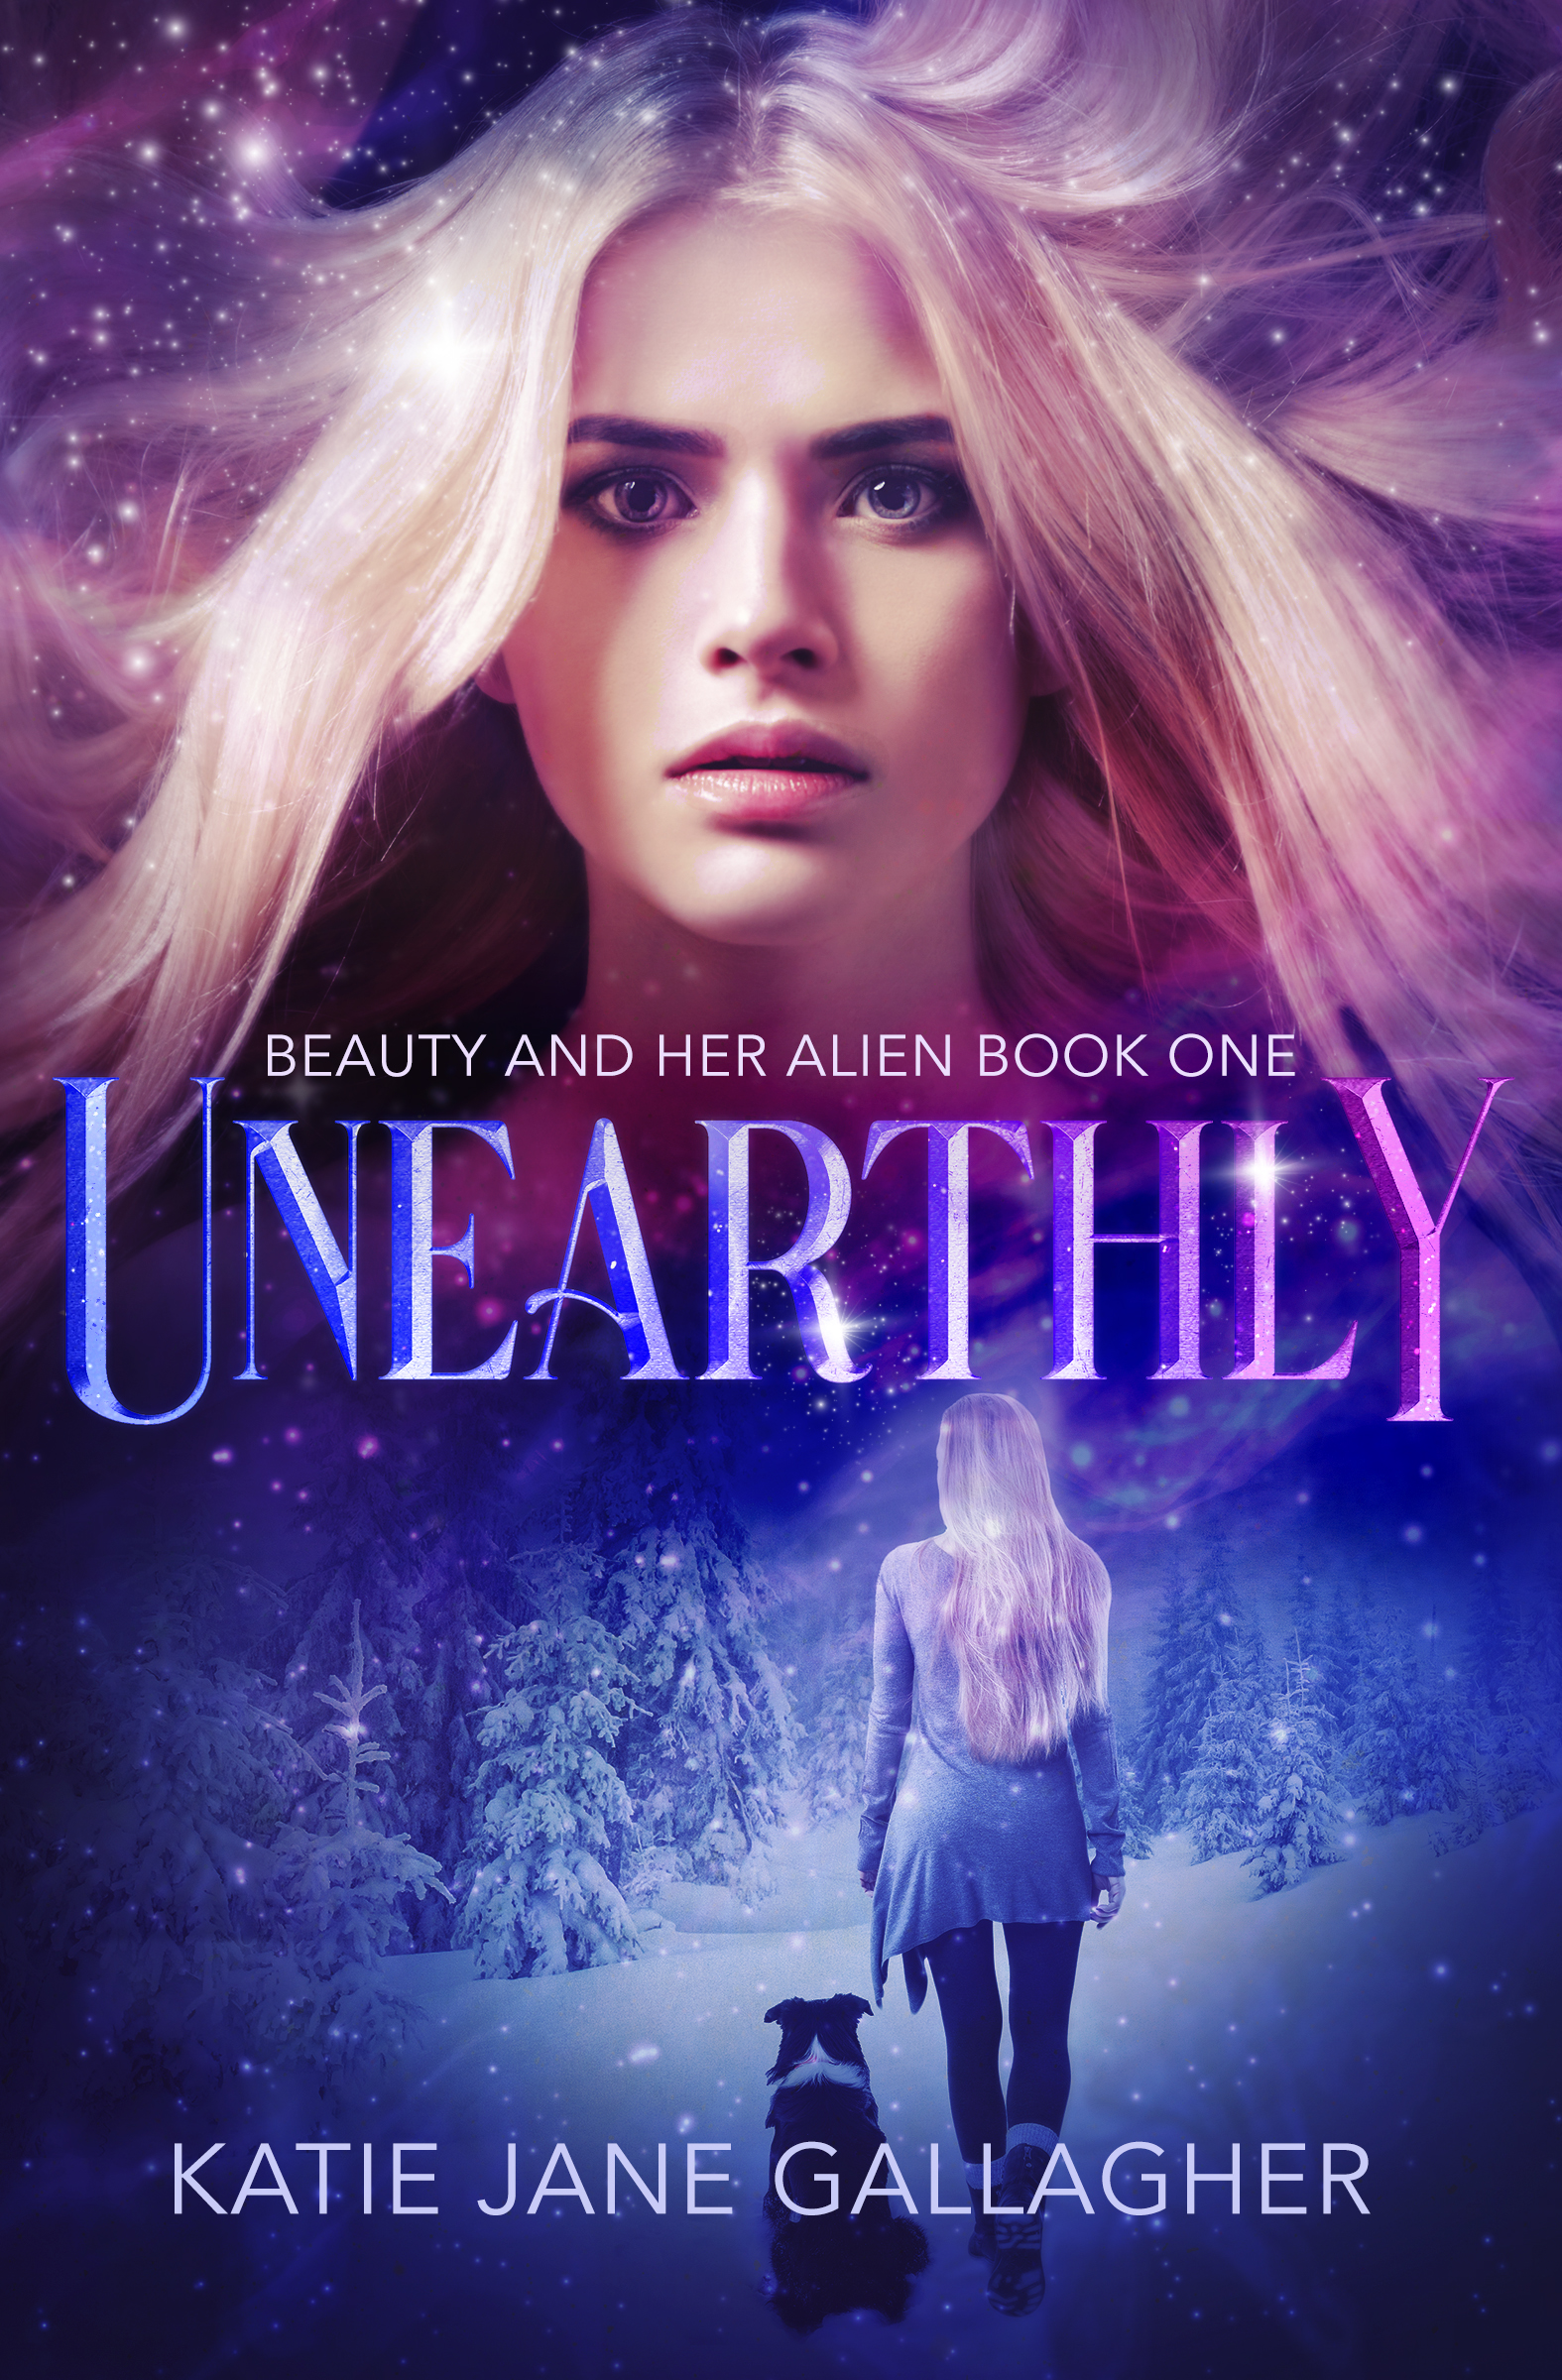 FREE: Unearthly by Katie Jane Gallagher